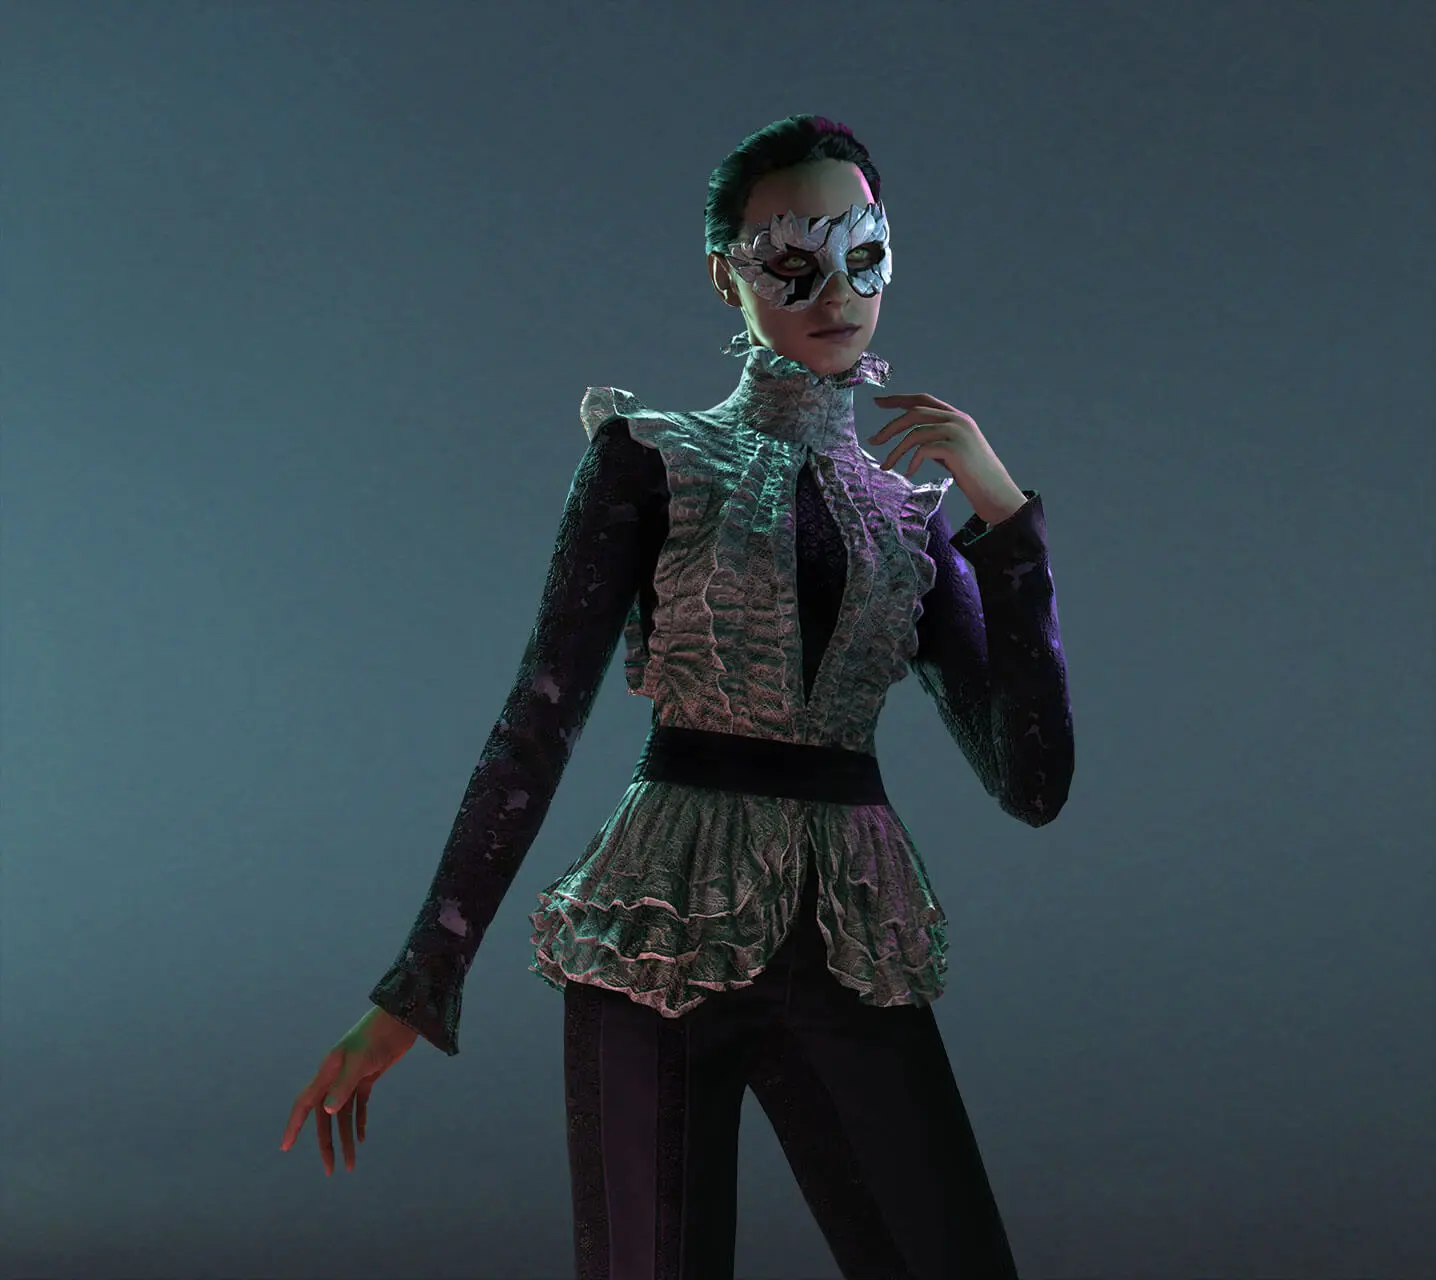 Malkavian is the last clan that will appear in Vampire: The Masquerade – Bloodlines 2